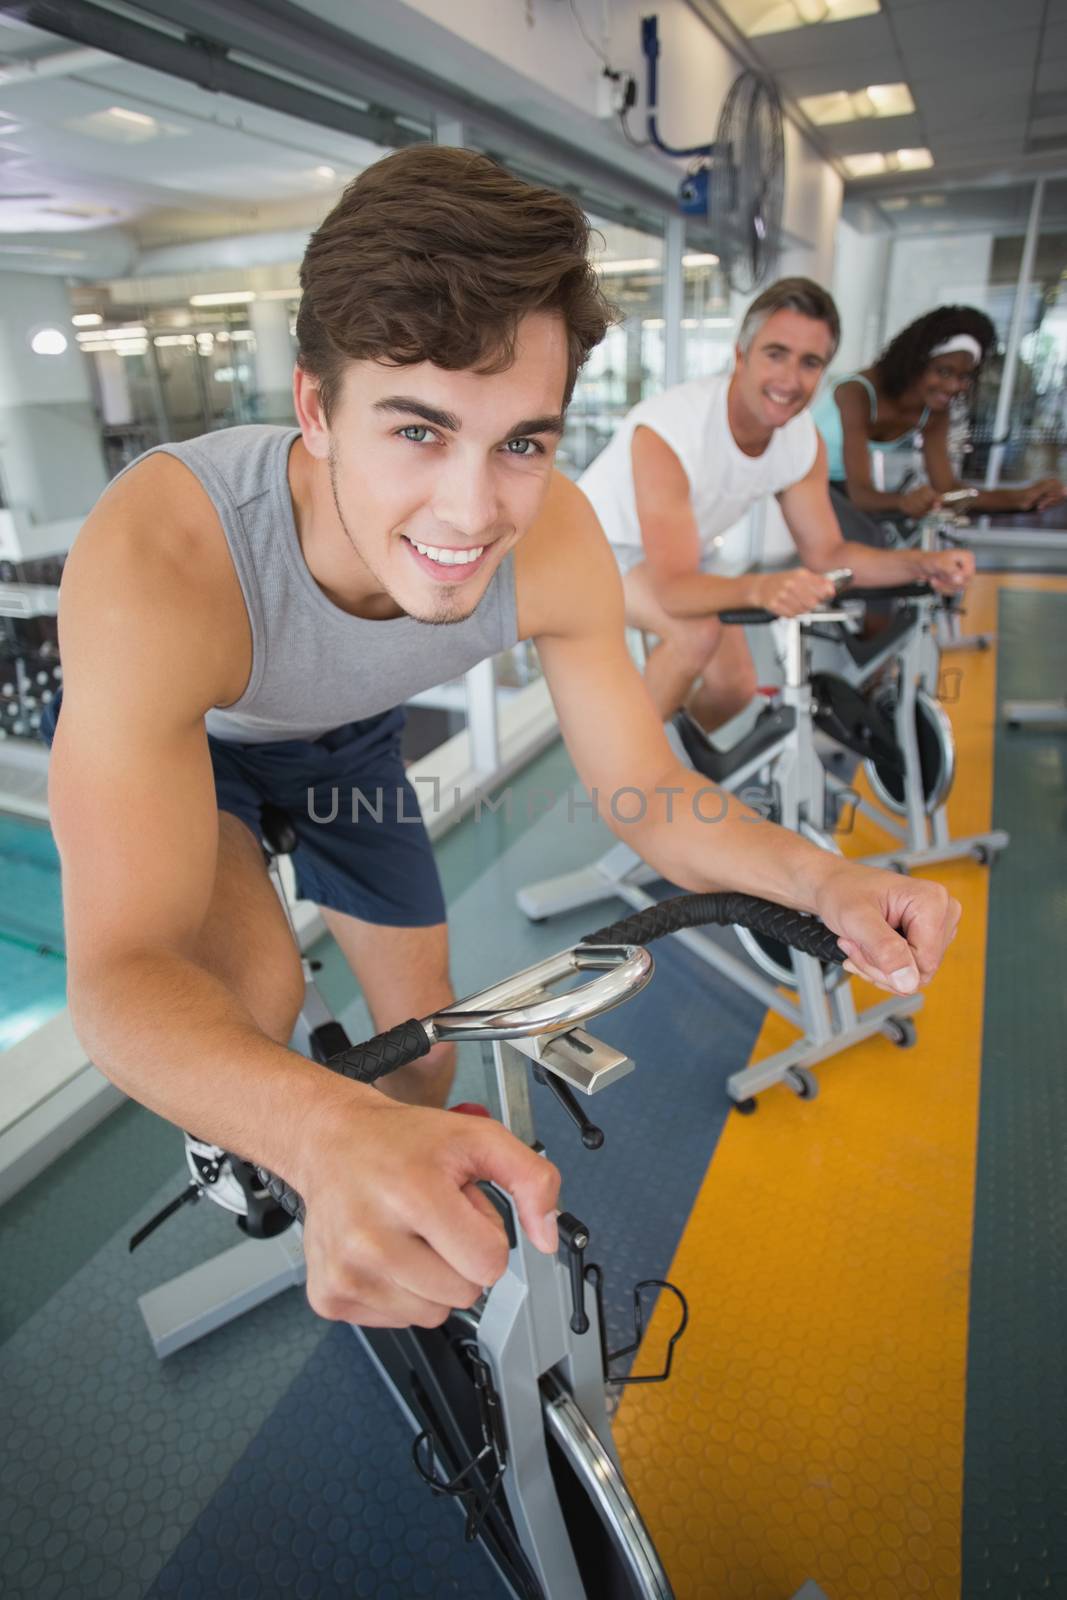 Three fit people working out on exercise bikes at the gym